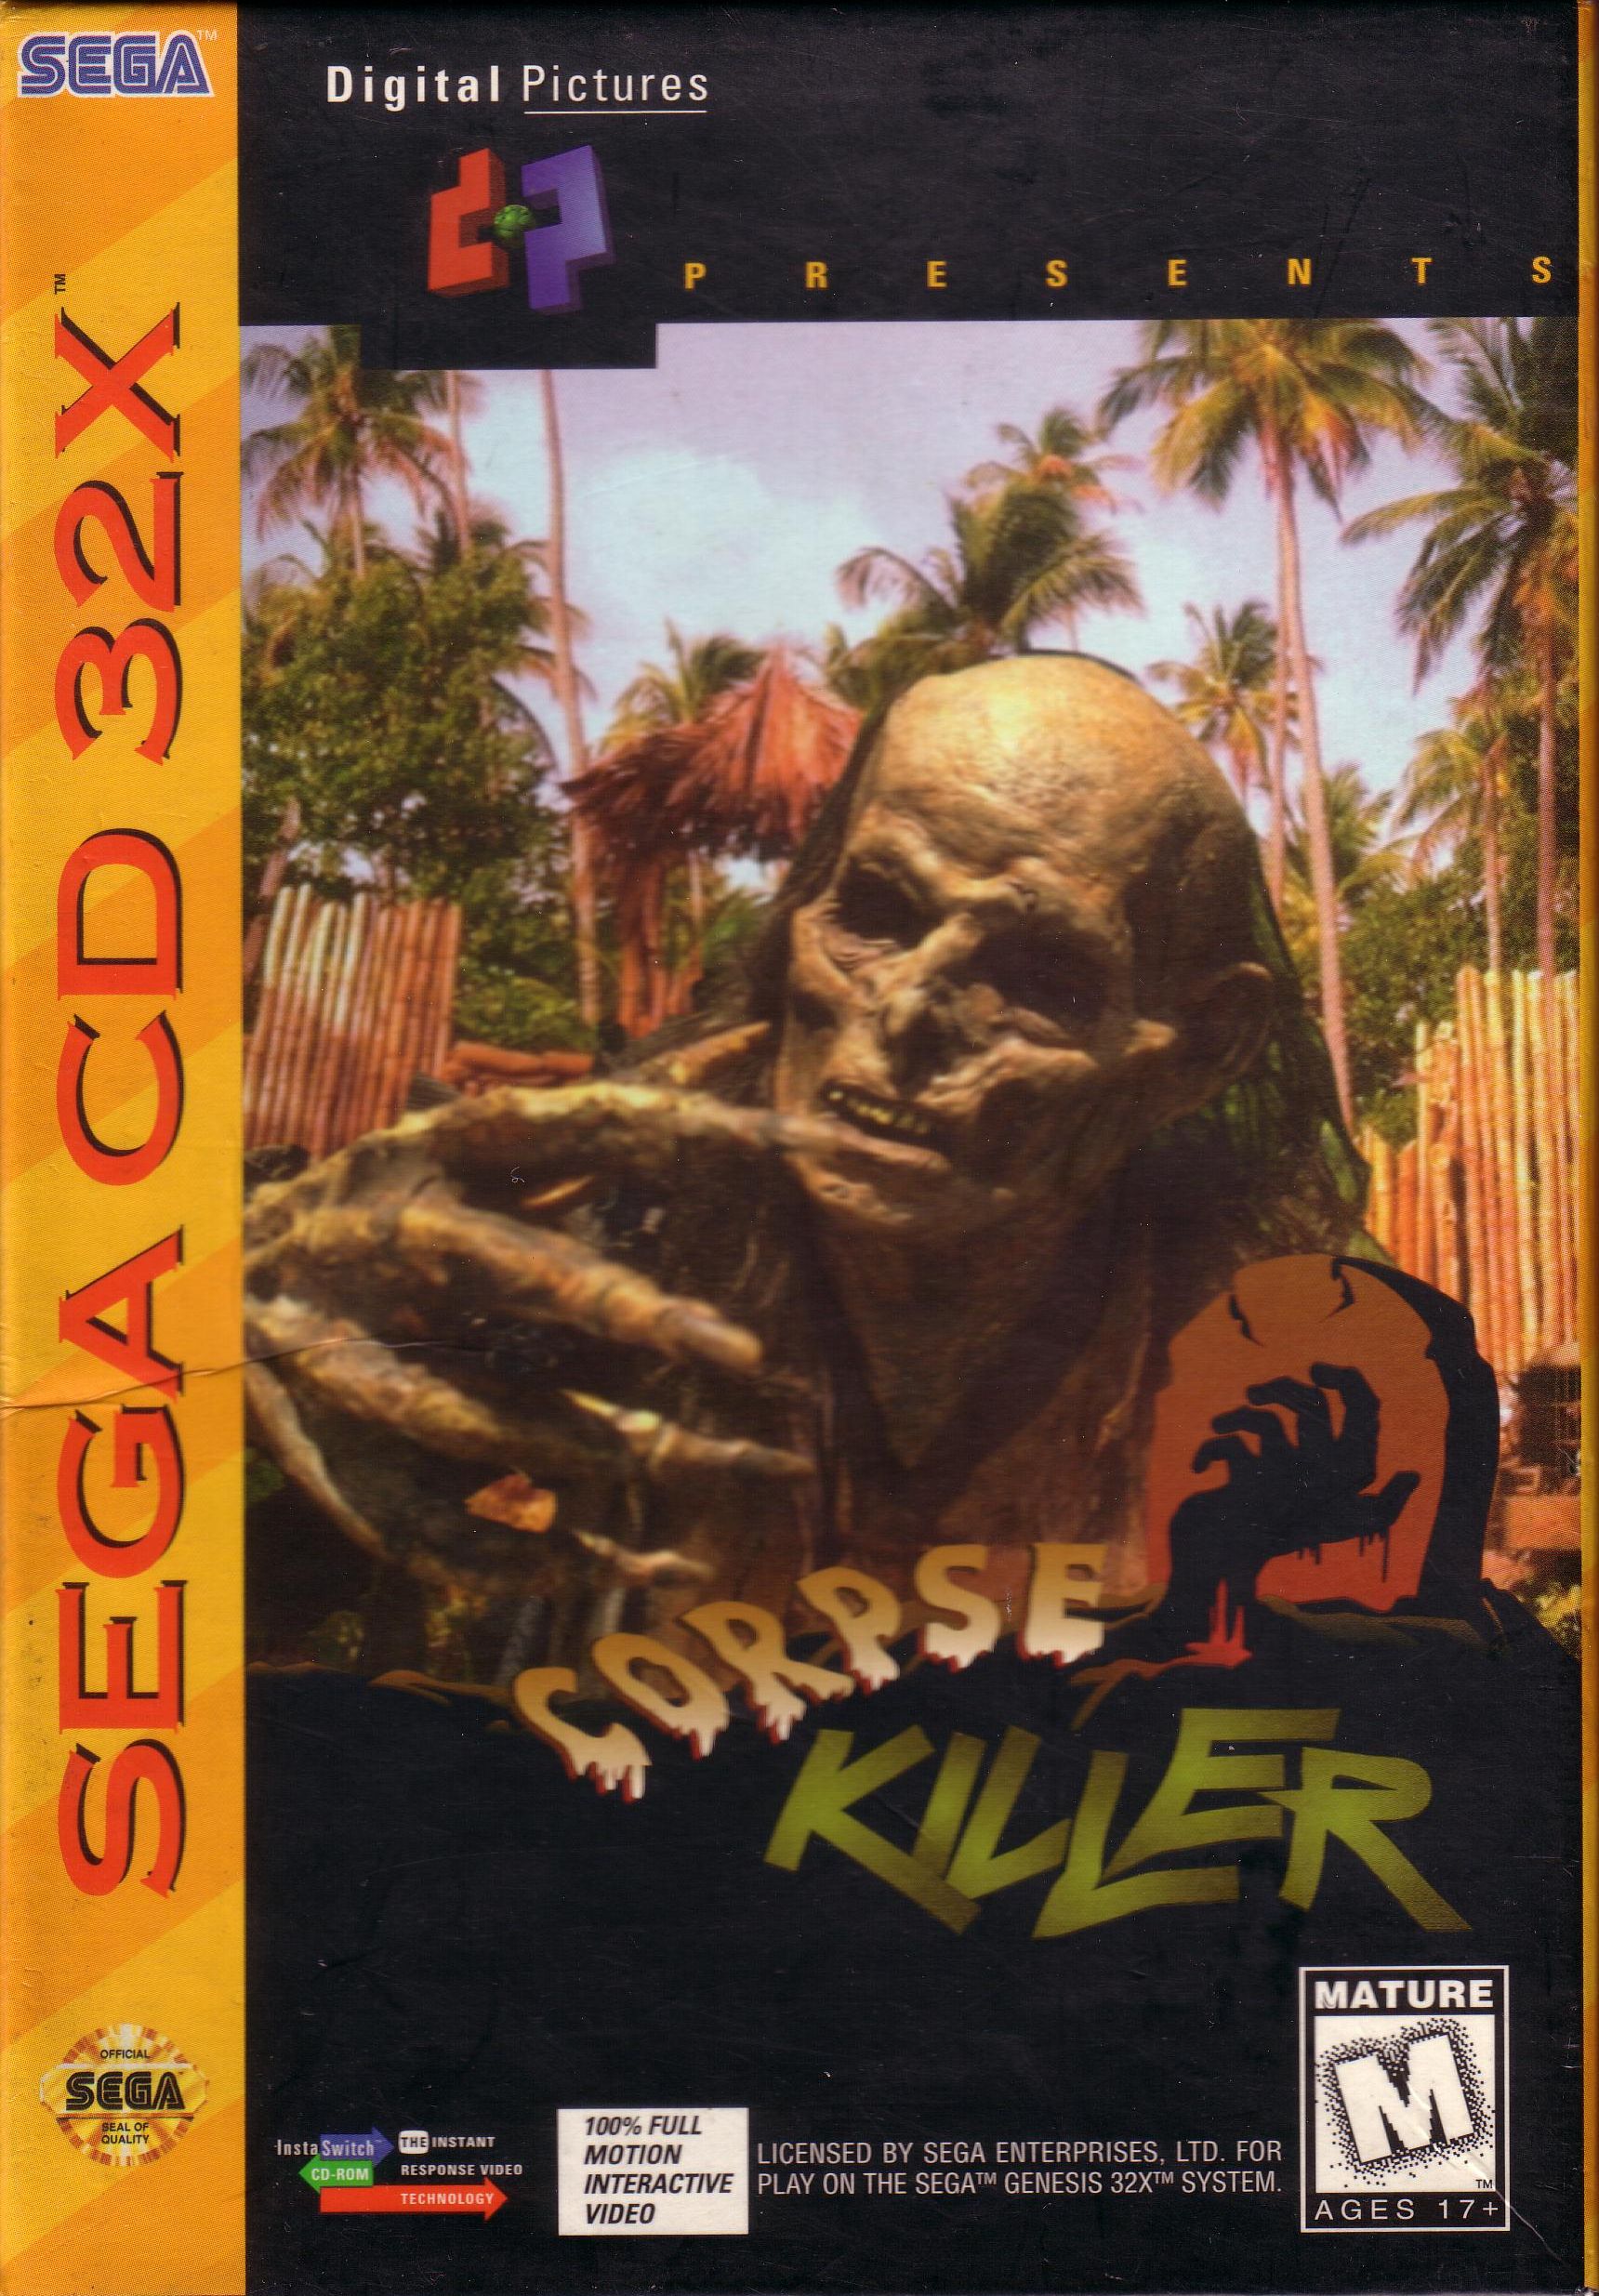 Corpse Killer (32X) (U) Front Cover